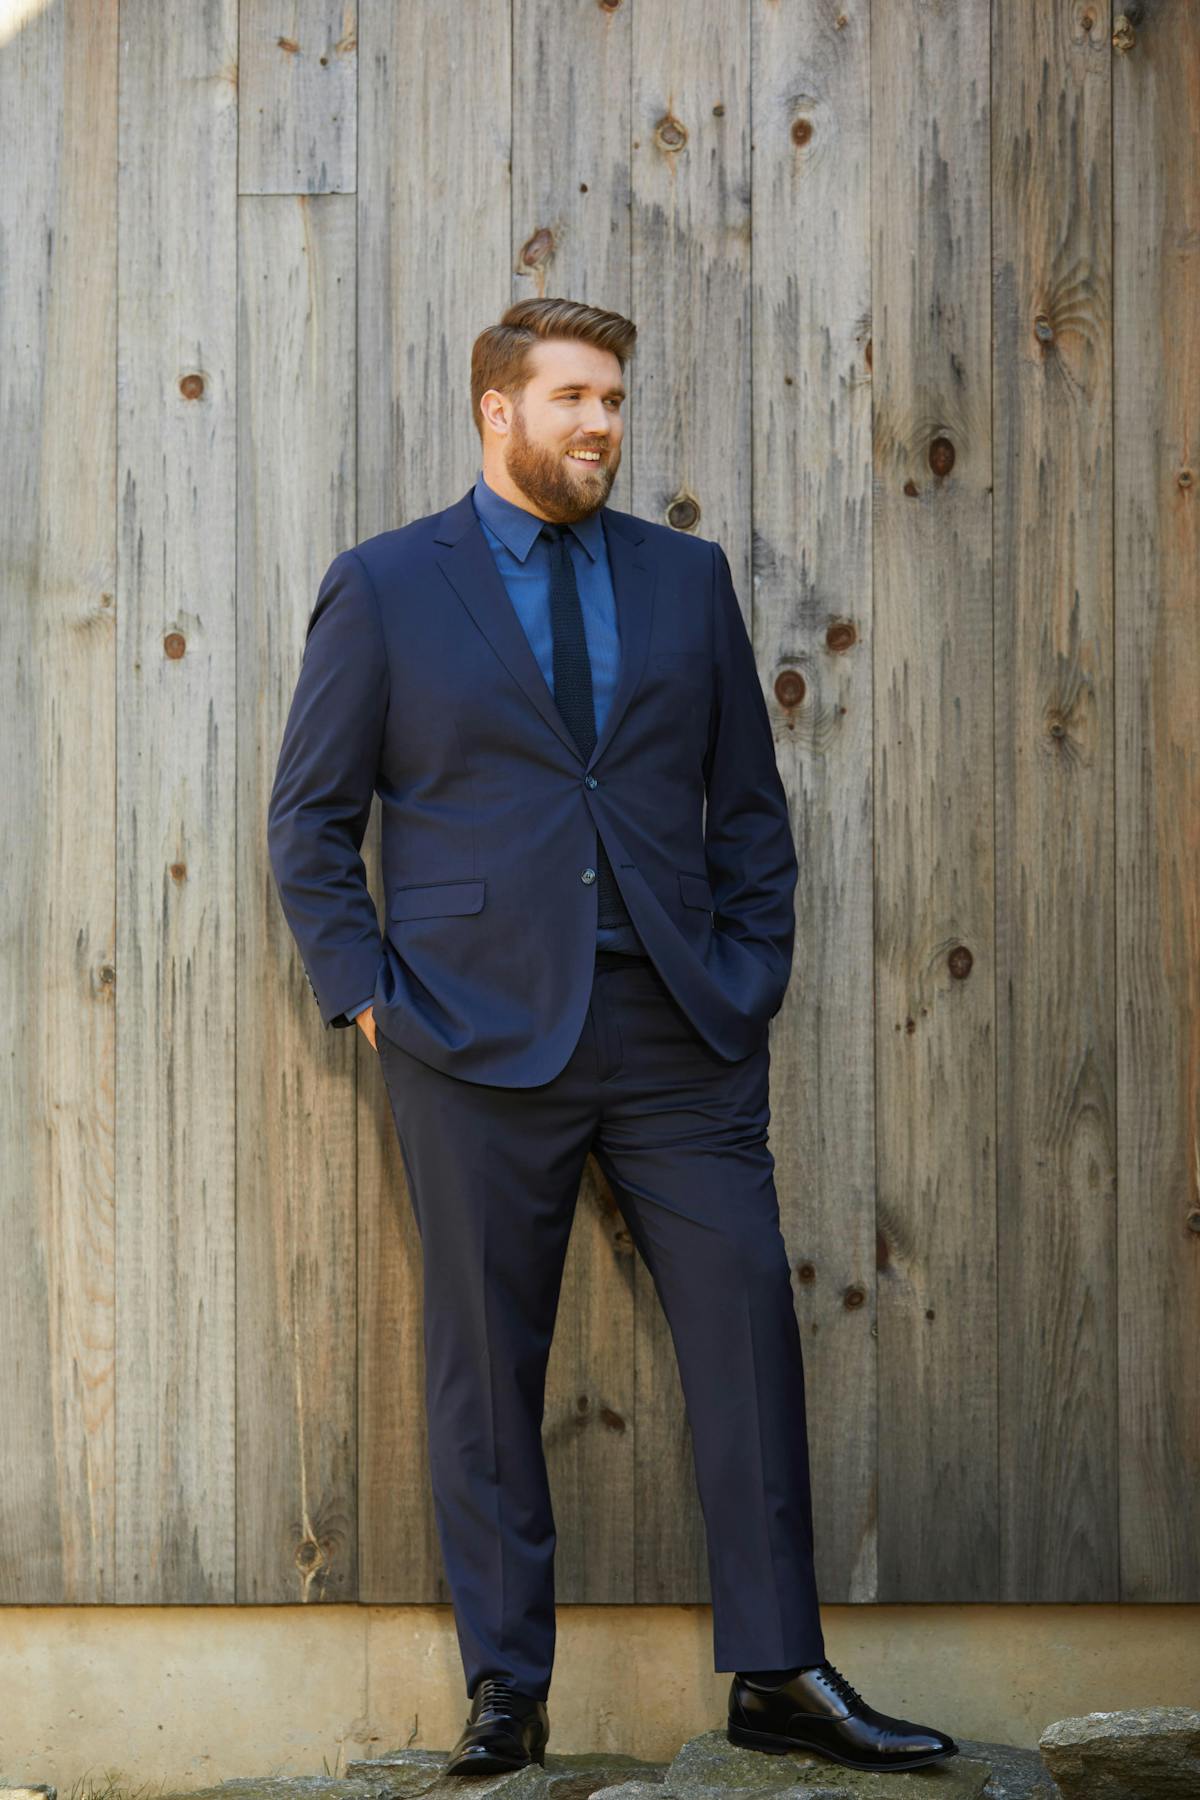 Men's navy blue suit outfit with black accessories and black dress shoes as men's style for work.